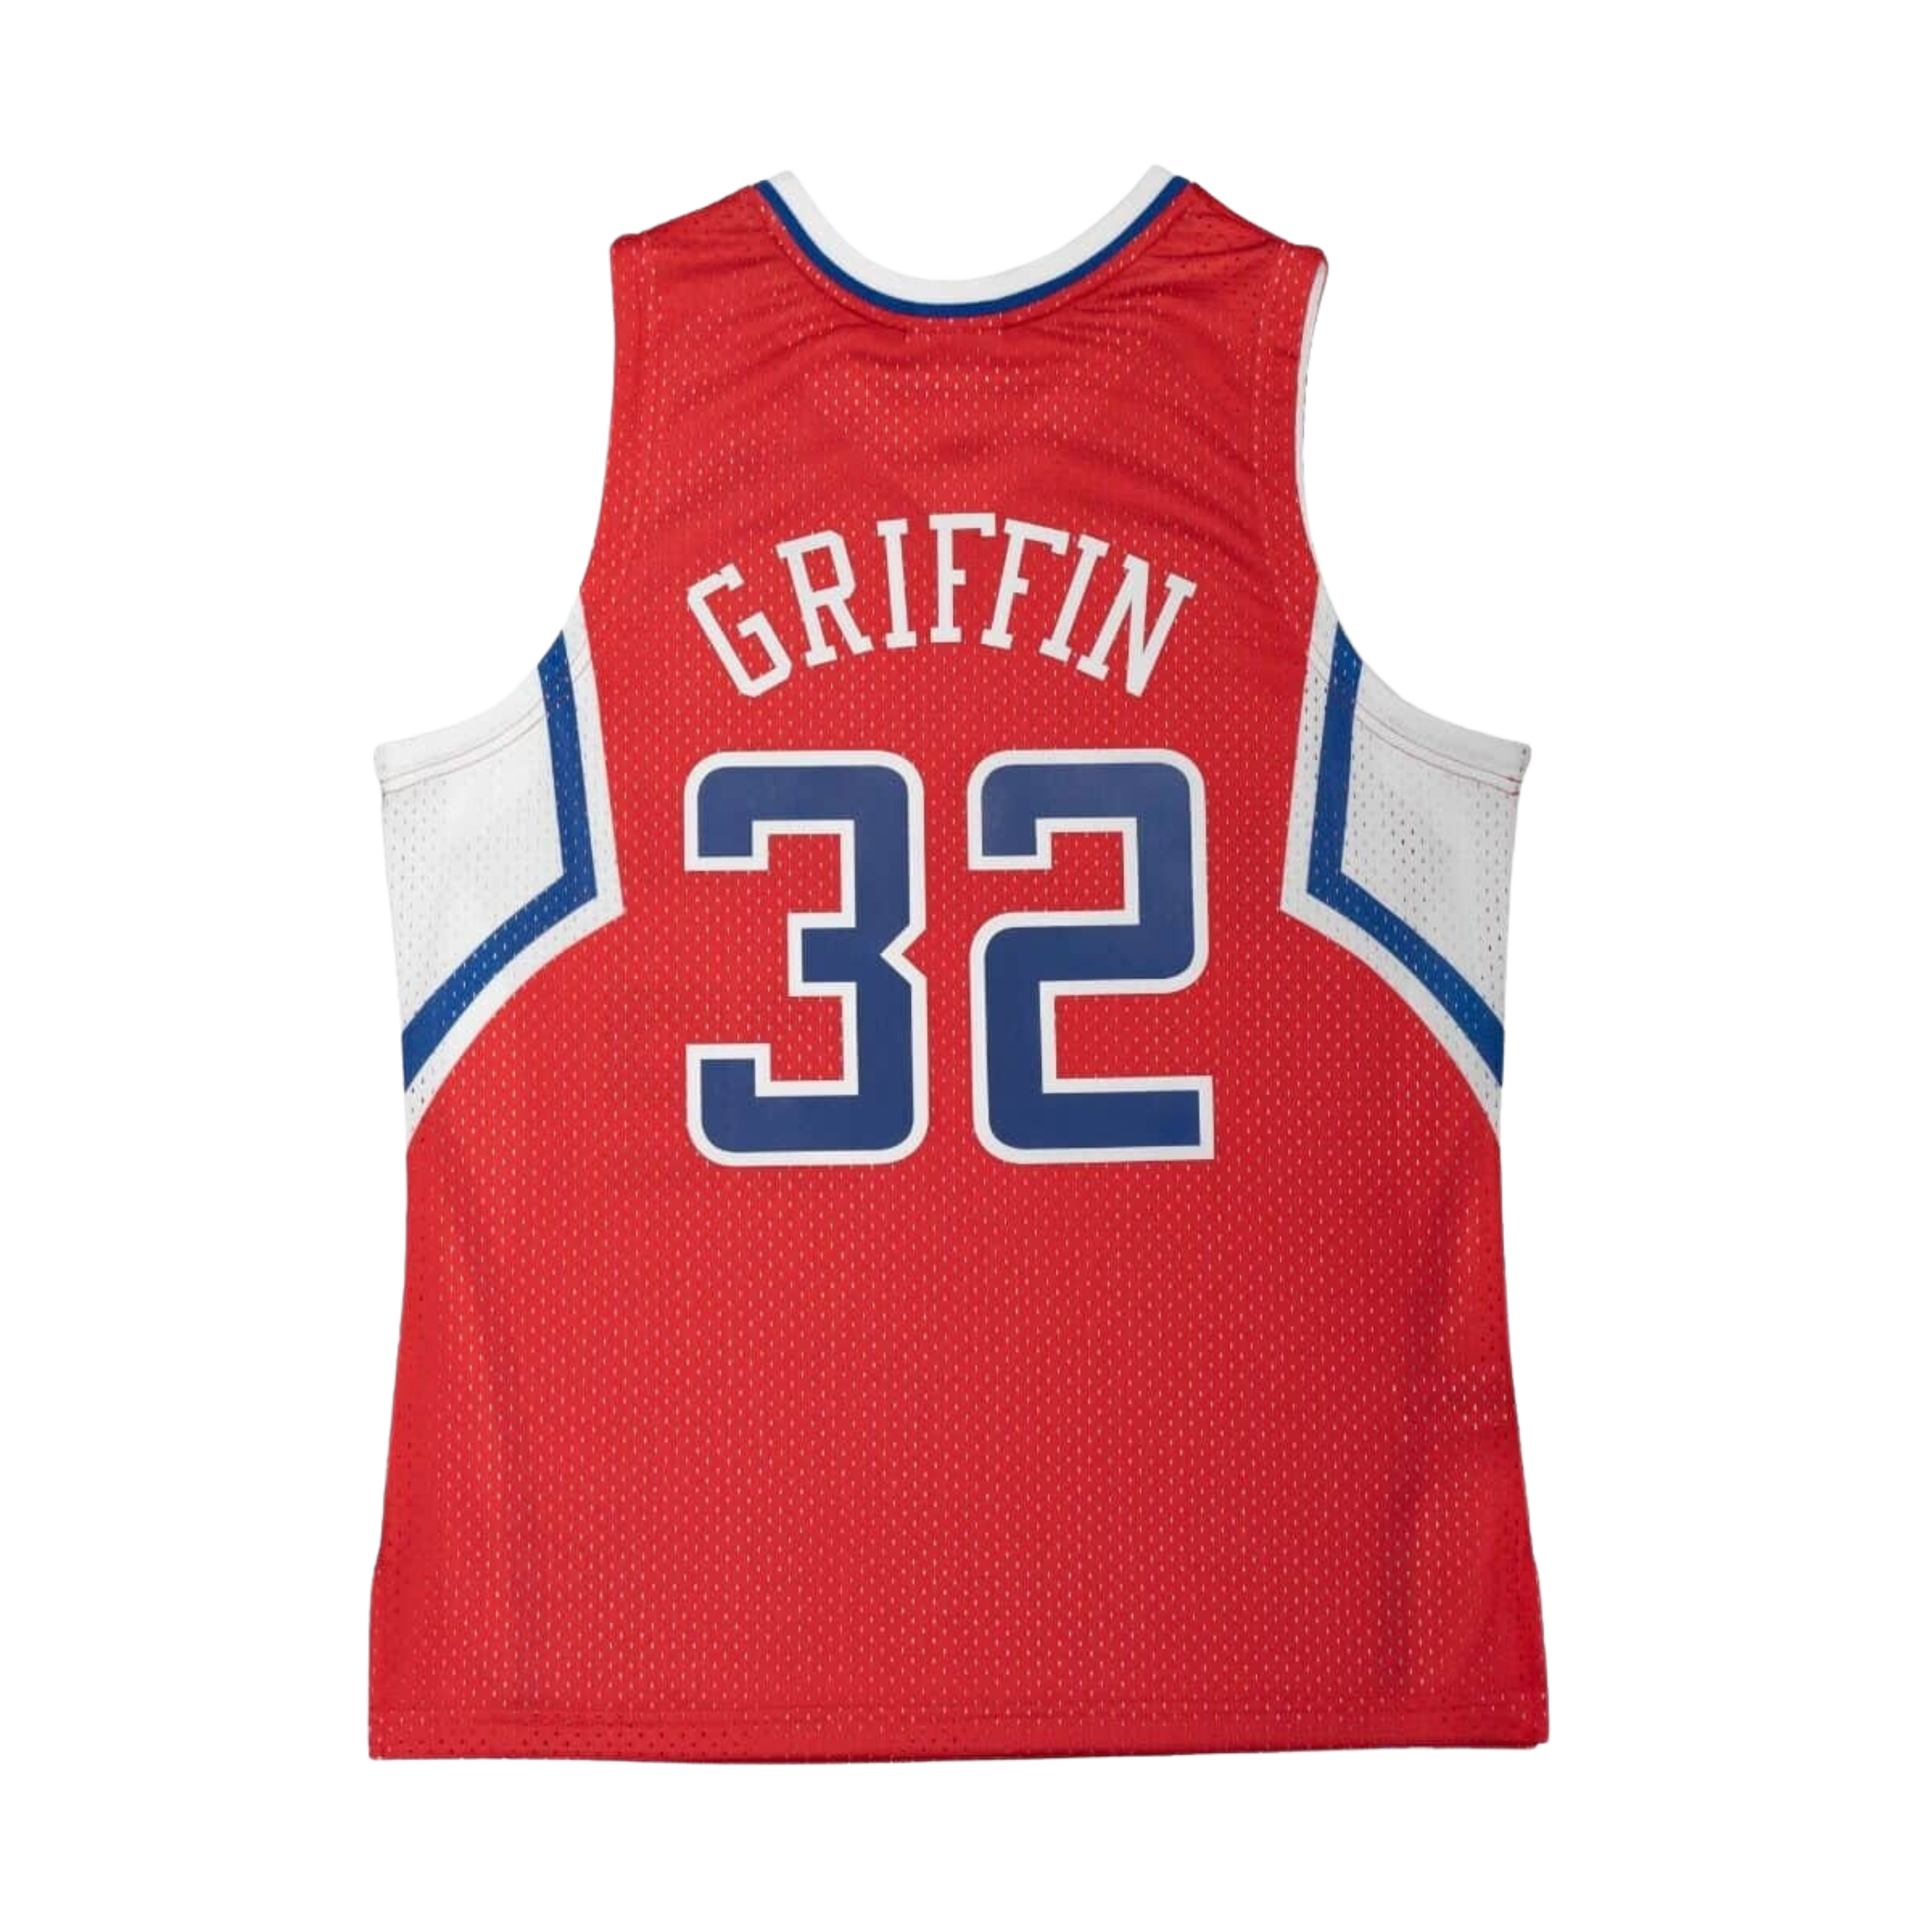 MITCHELL & NESS SWINGMAN JERSEY BLAKE GRIFFIN LOS ANGELES CLIPPERS 2010-11